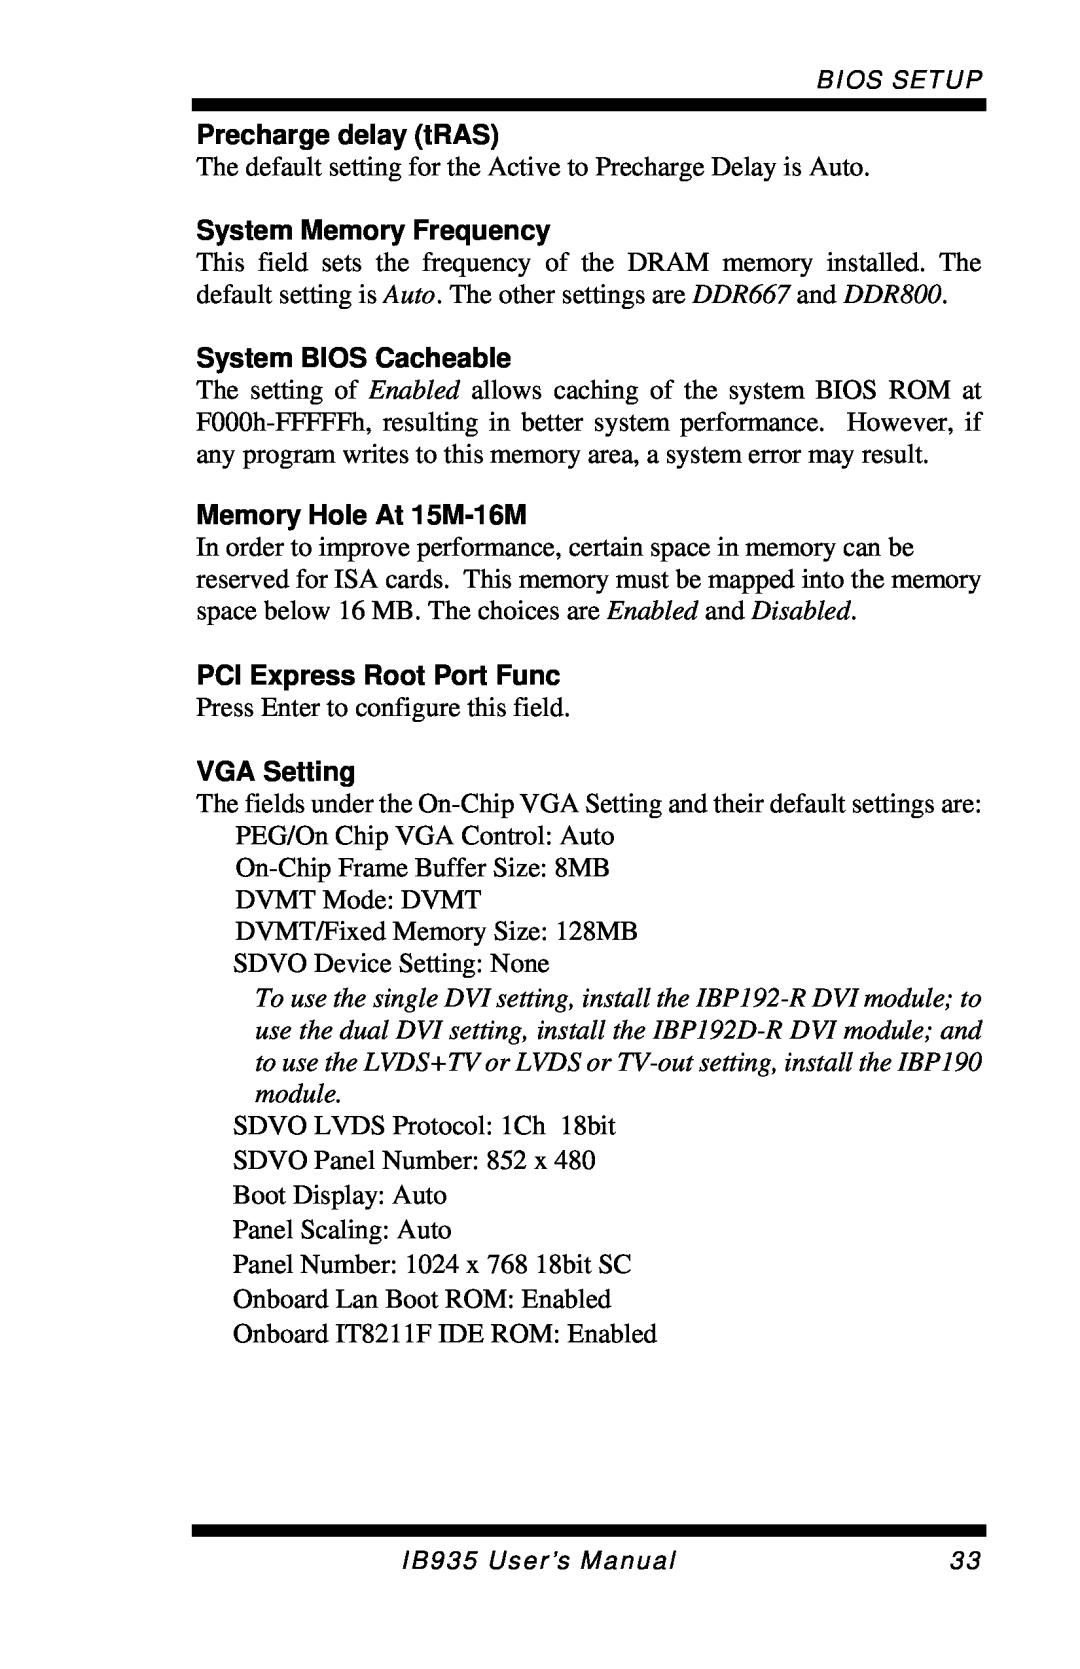 Intel IB935 Precharge delay tRAS, System Memory Frequency, System BIOS Cacheable, Memory Hole At 15M-16M, VGA Setting 